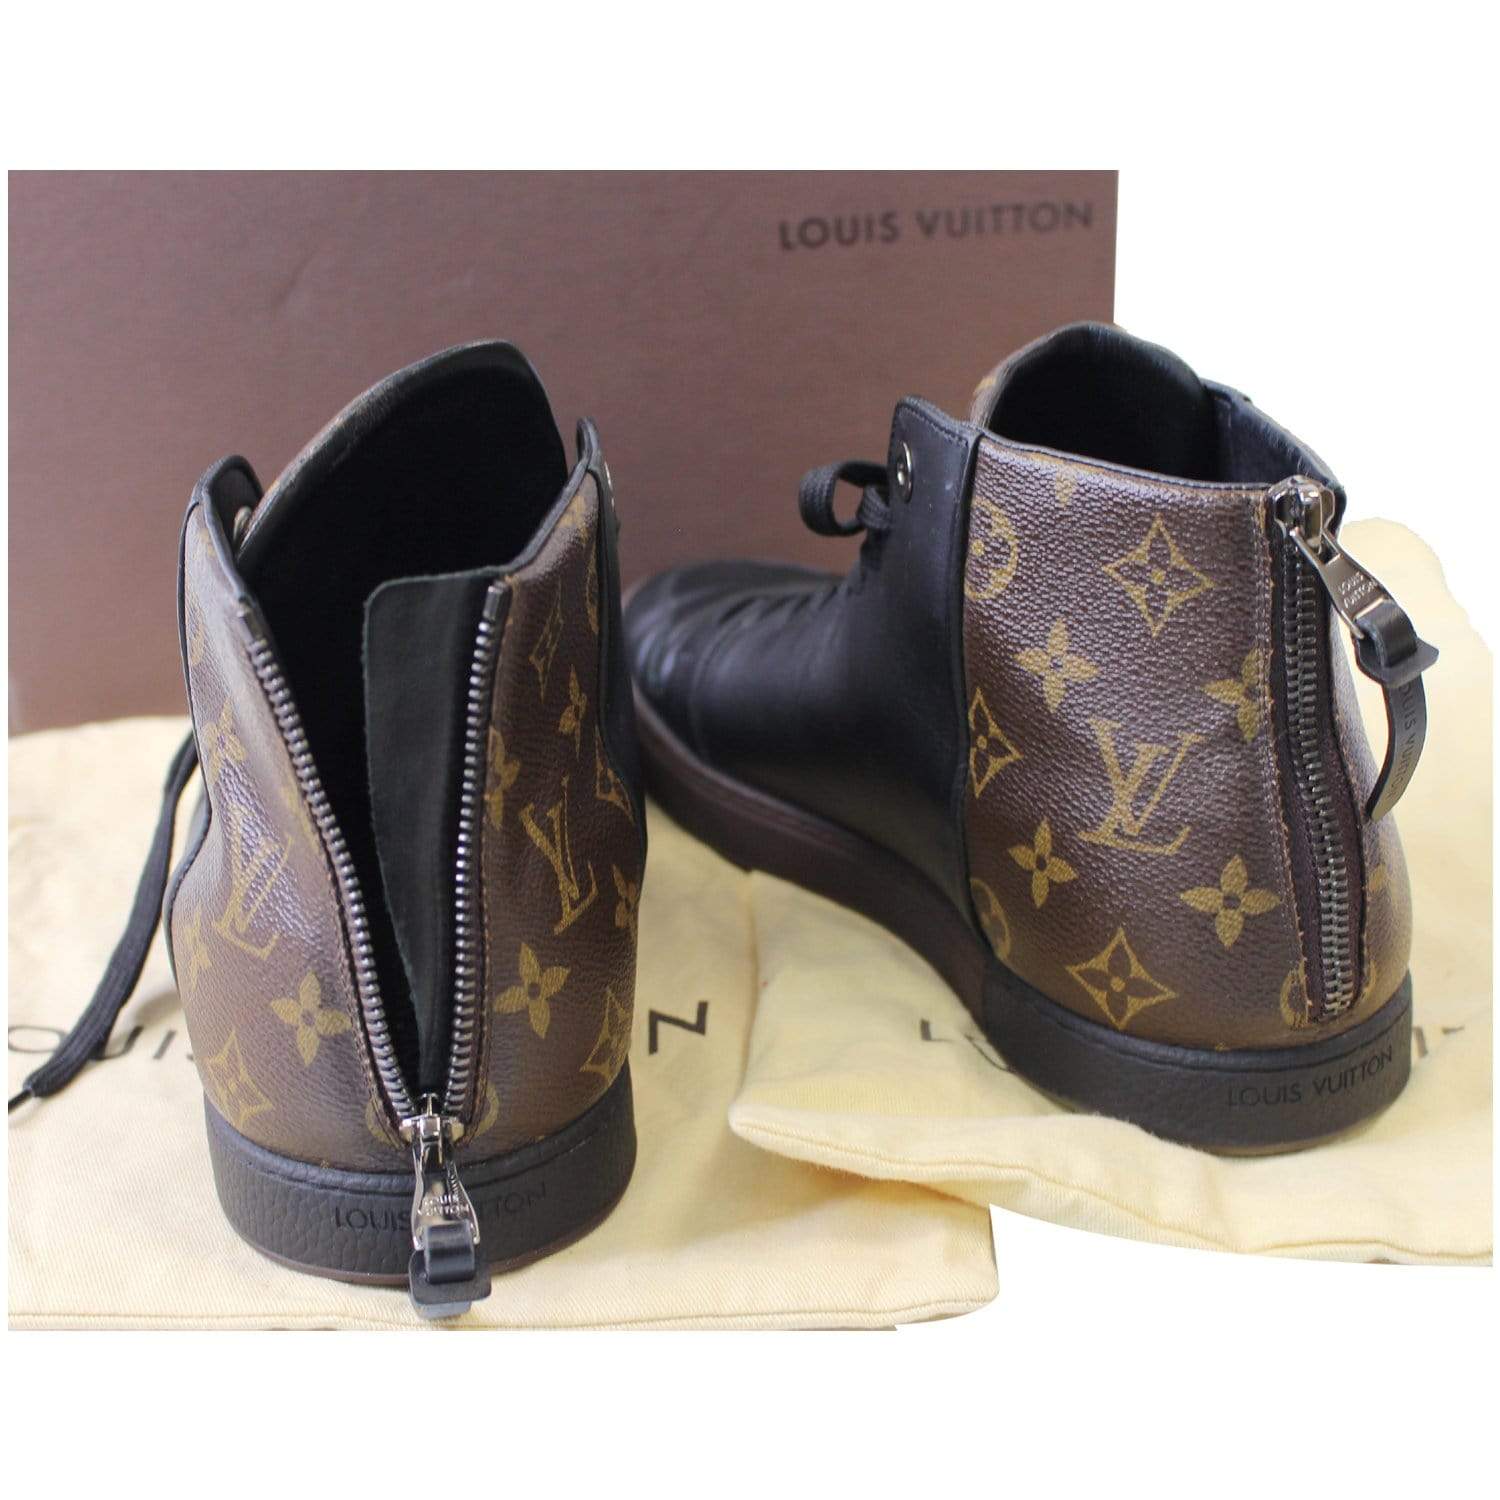 UPTOSTYLE - Design Selection Shop And Style Mag  Sneakers, Louis vuitton  shoes sneakers, Louis vuitton shoes